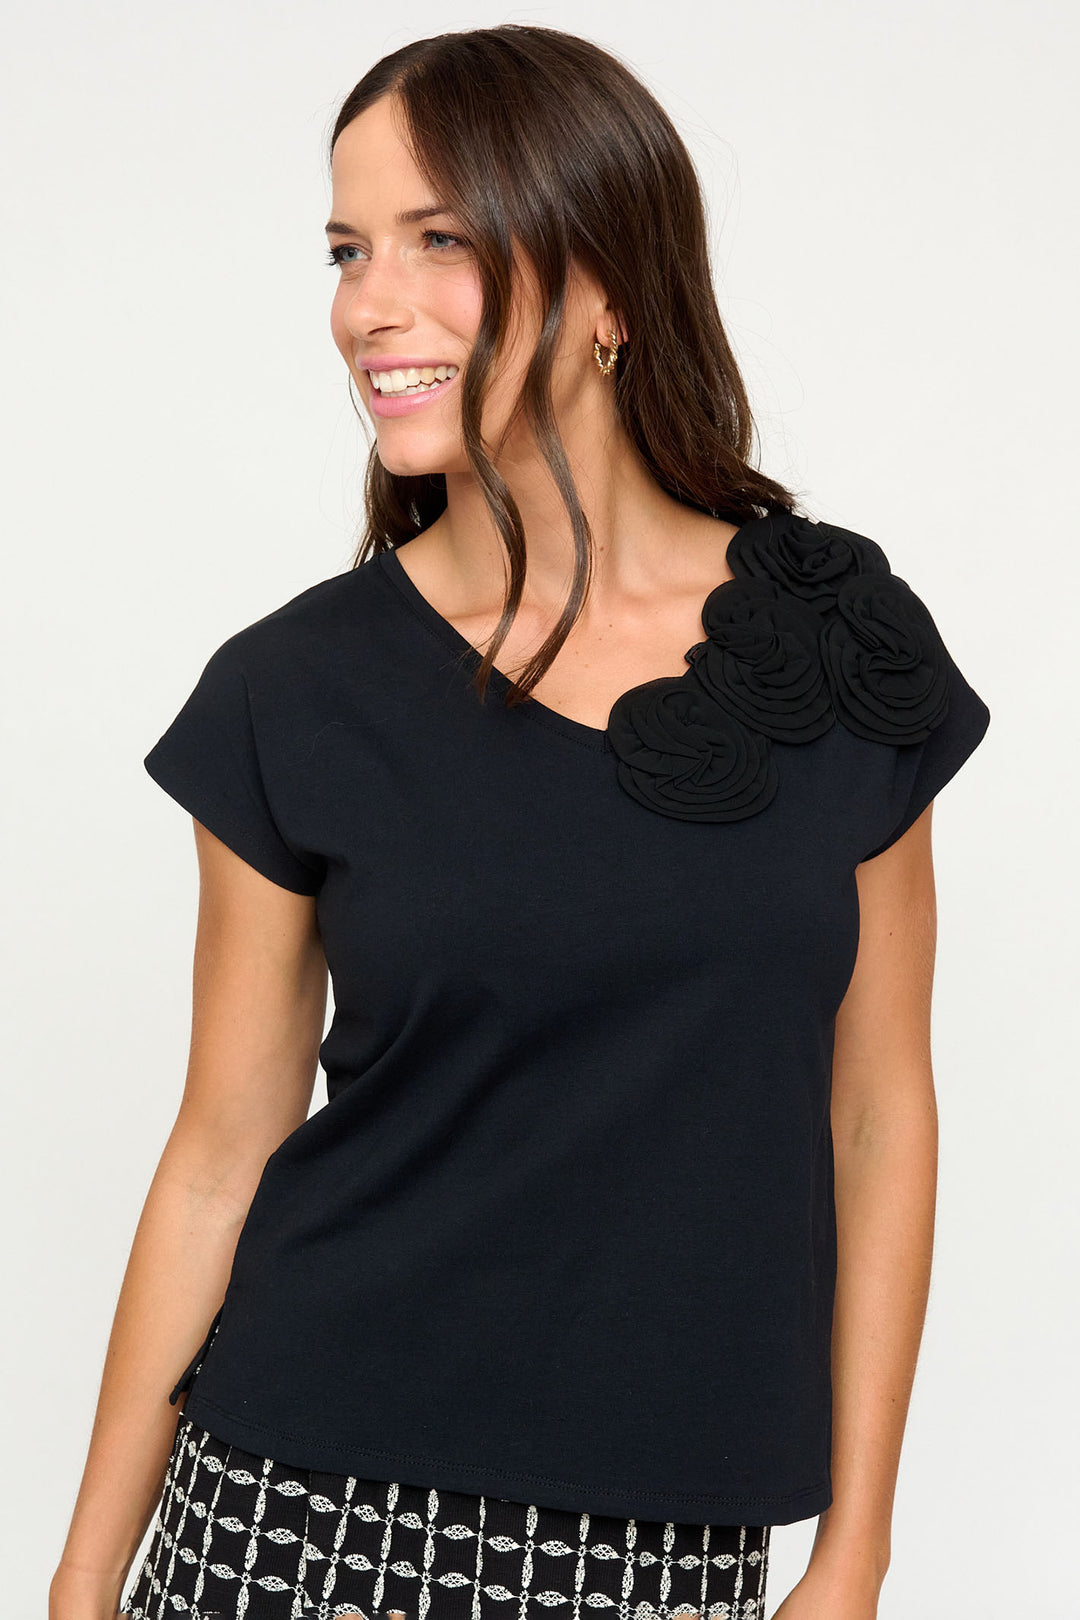 Bariloche Hinojales Black V-Neck Cap Sleeve Top - Rouge Boutique Inverness